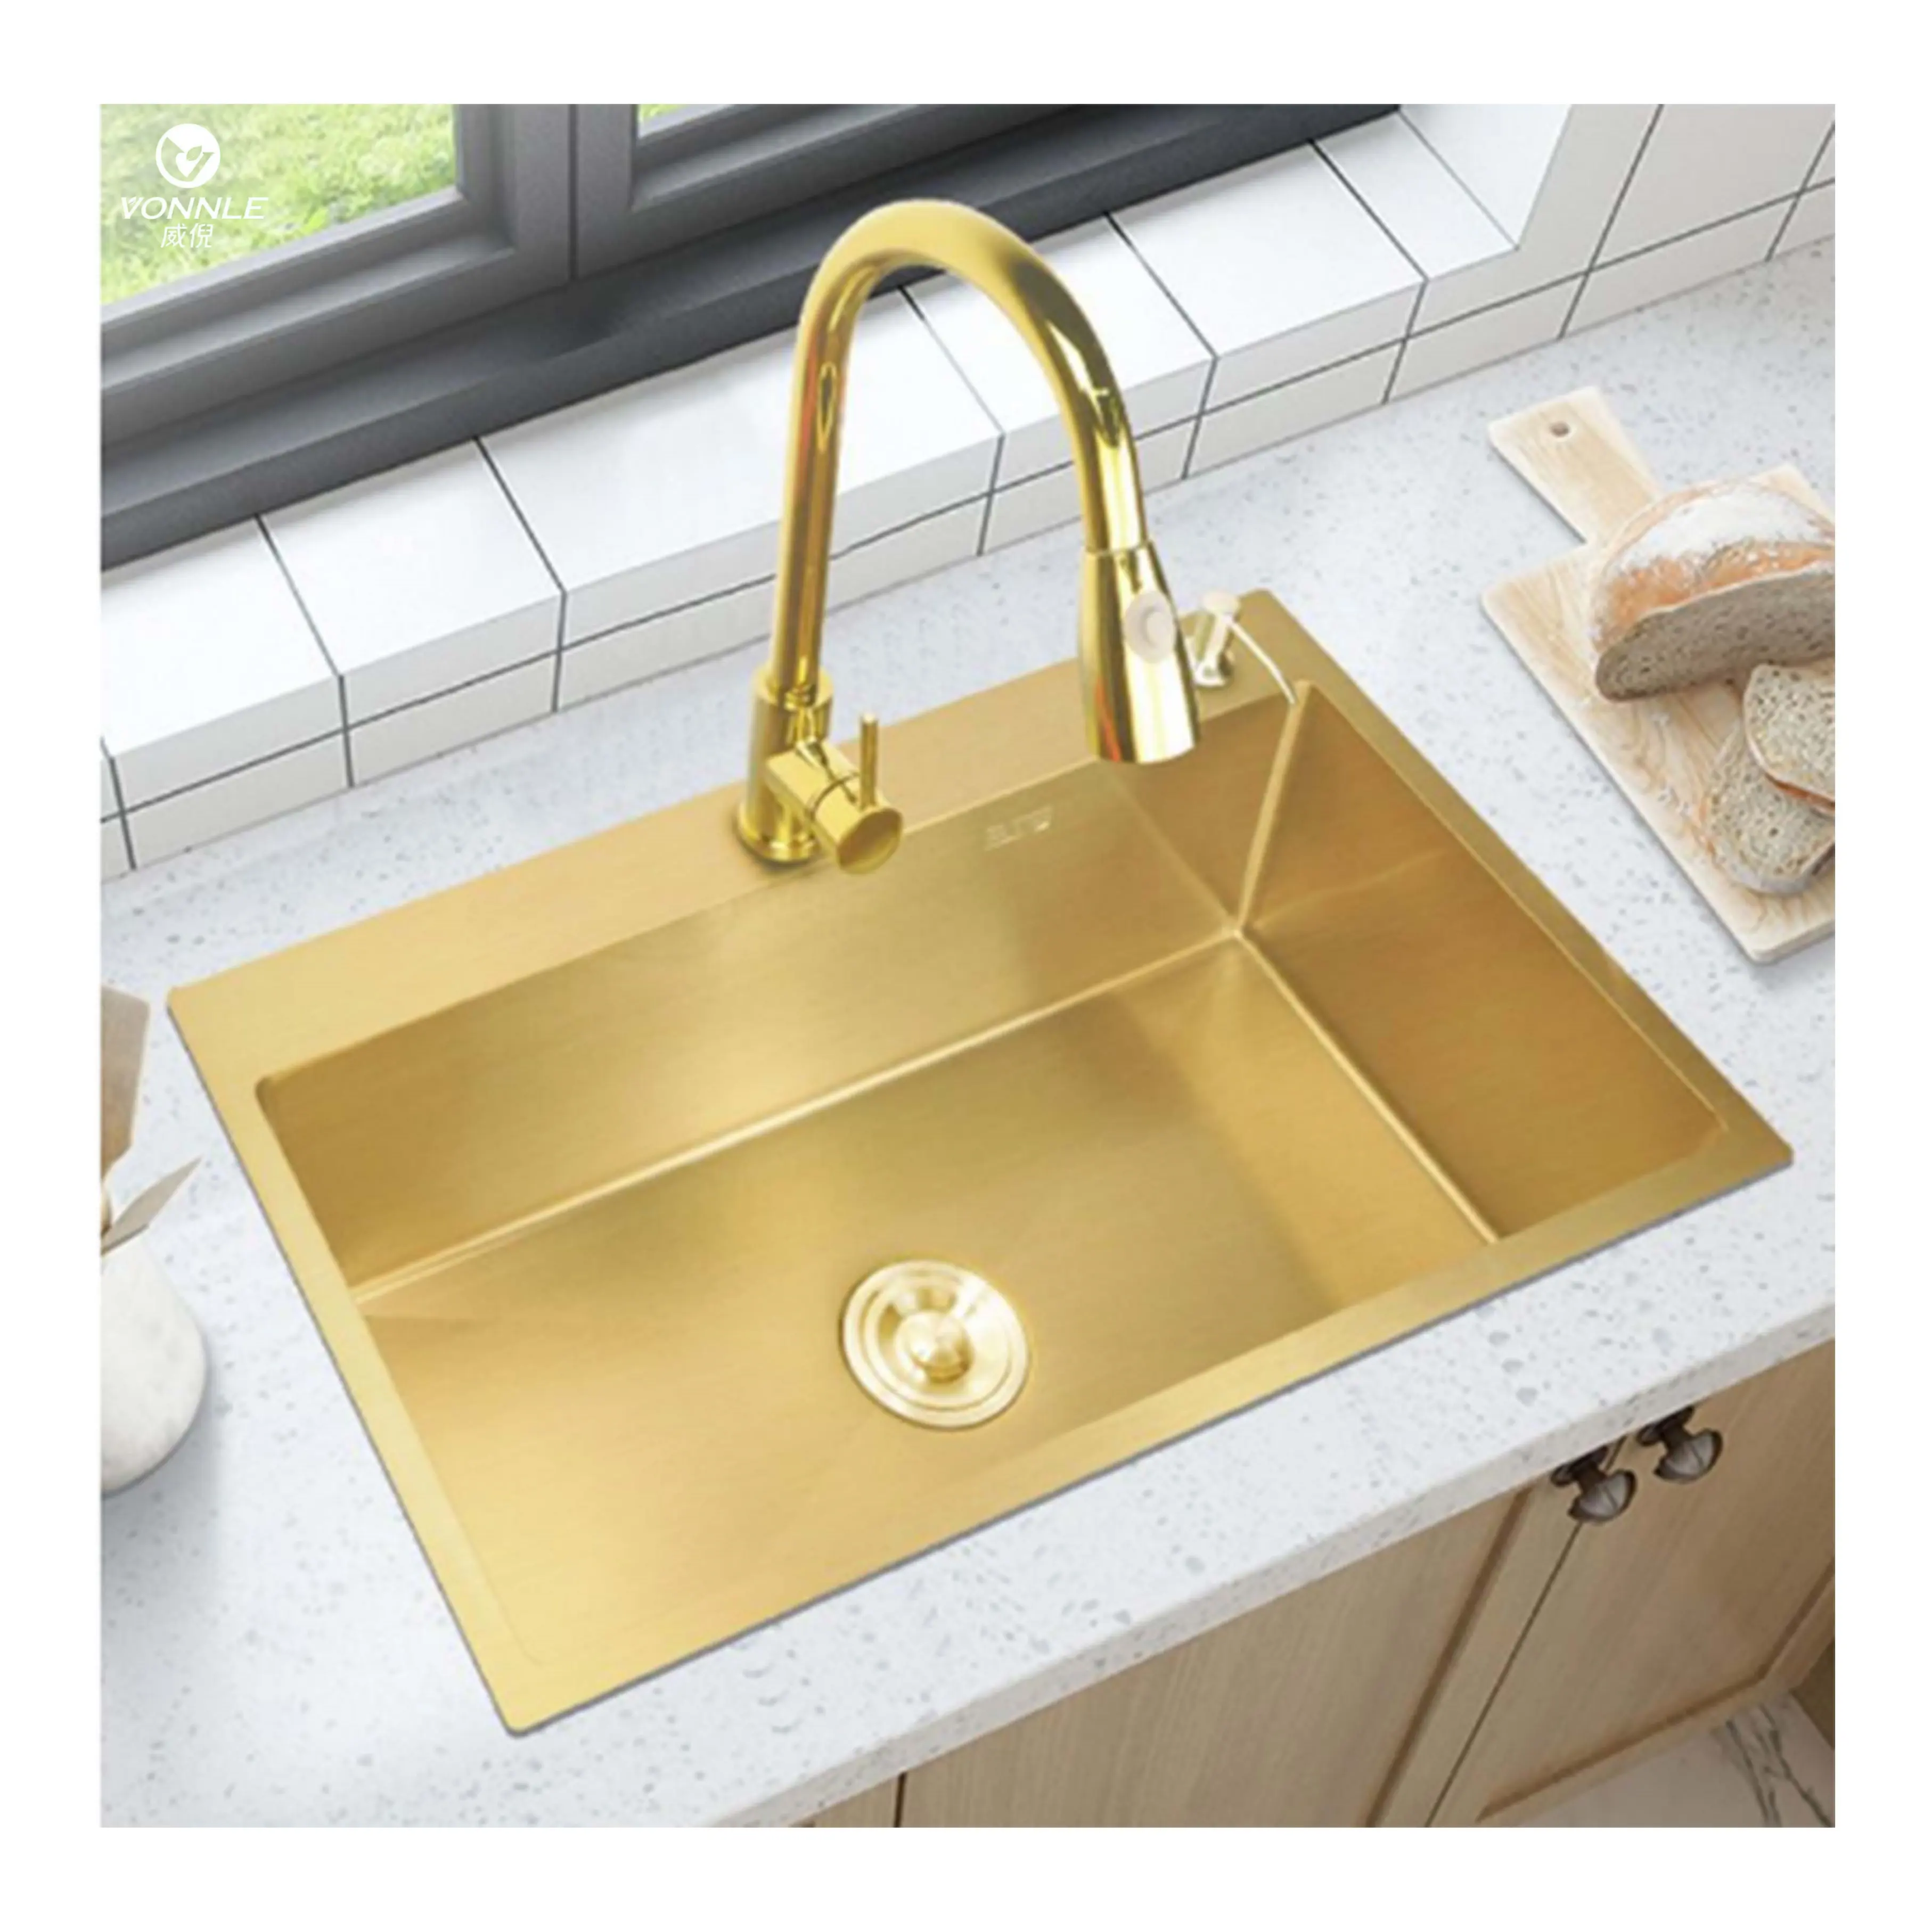 Made in China Gold kitchen using stainless steel workstation sink Kitchen sink stainless steel